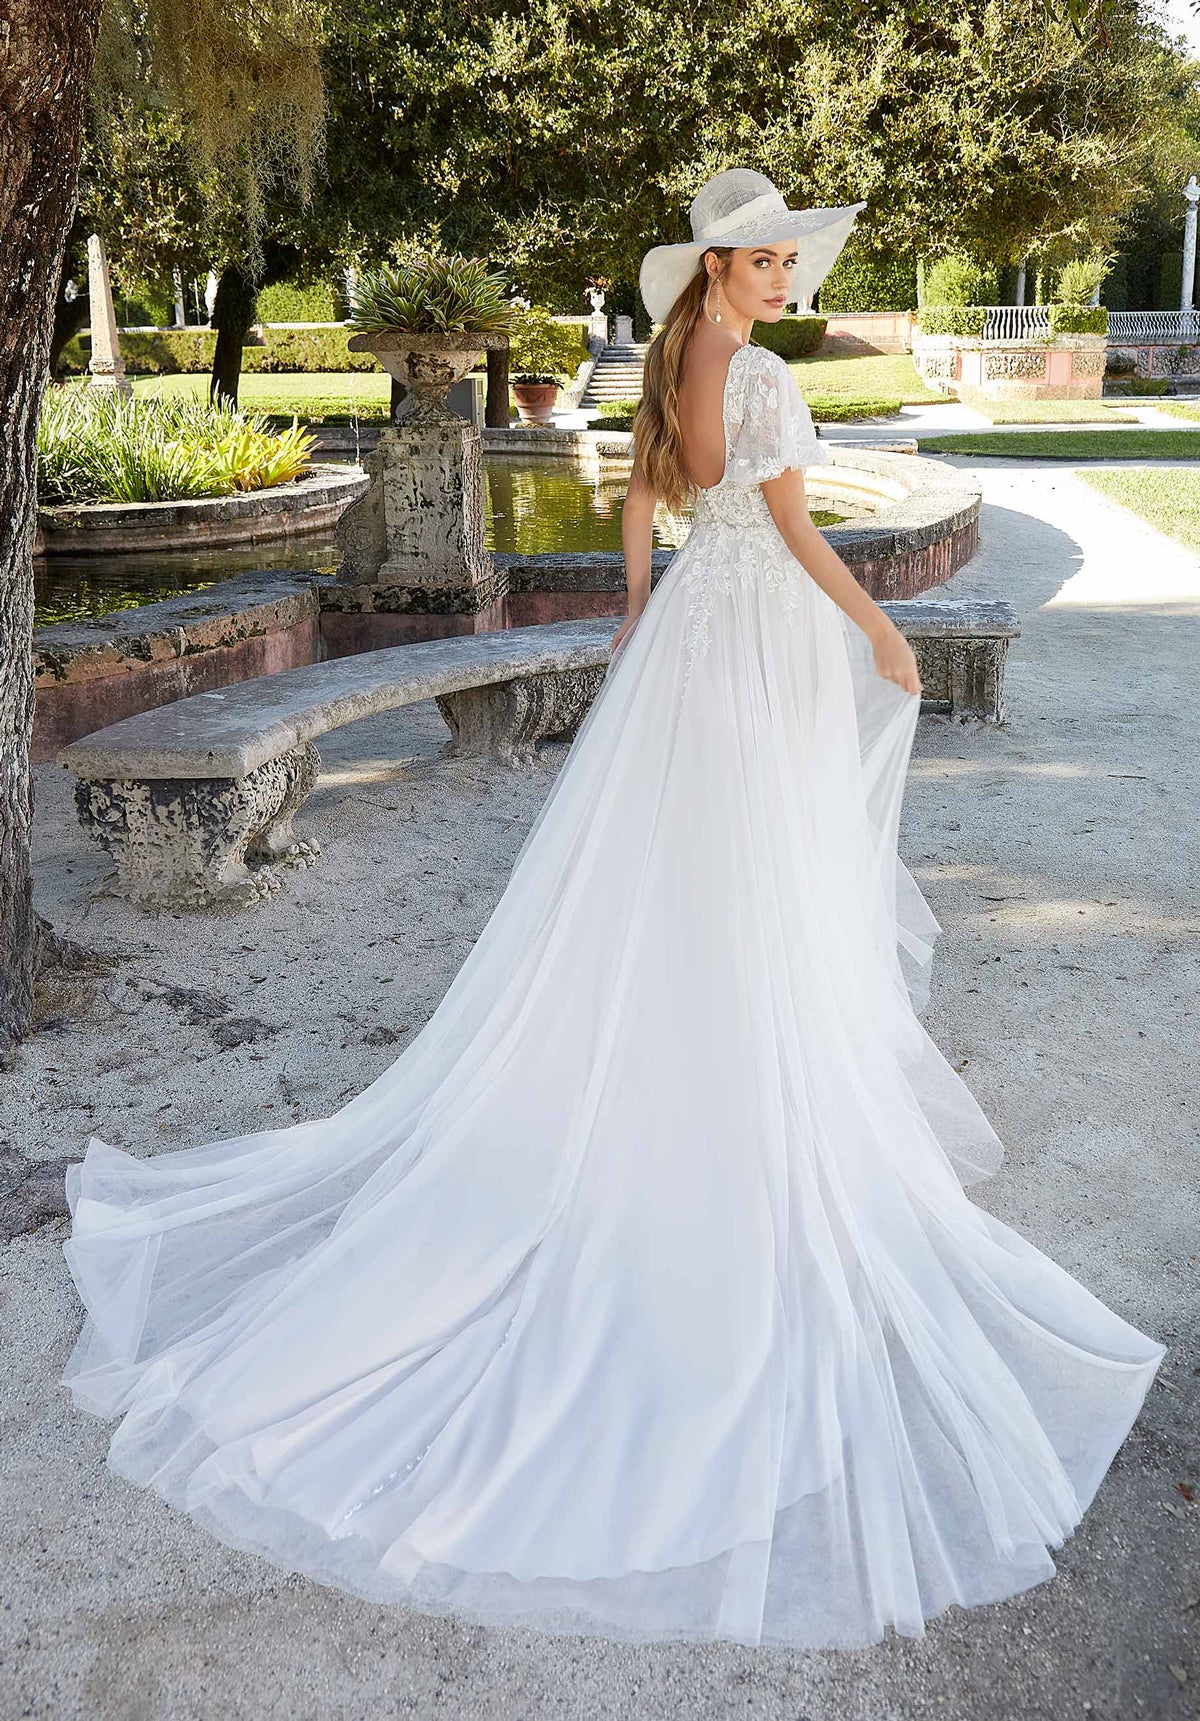 Voyage - 6975 - Fidelina - Cheron's Bridal, Wedding Gown - Morilee Voyage - - Wedding Gowns Dresses Chattanooga Hixson Shops Boutiques Tennessee TN Georgia GA MSRP Lowest Prices Sale Discount